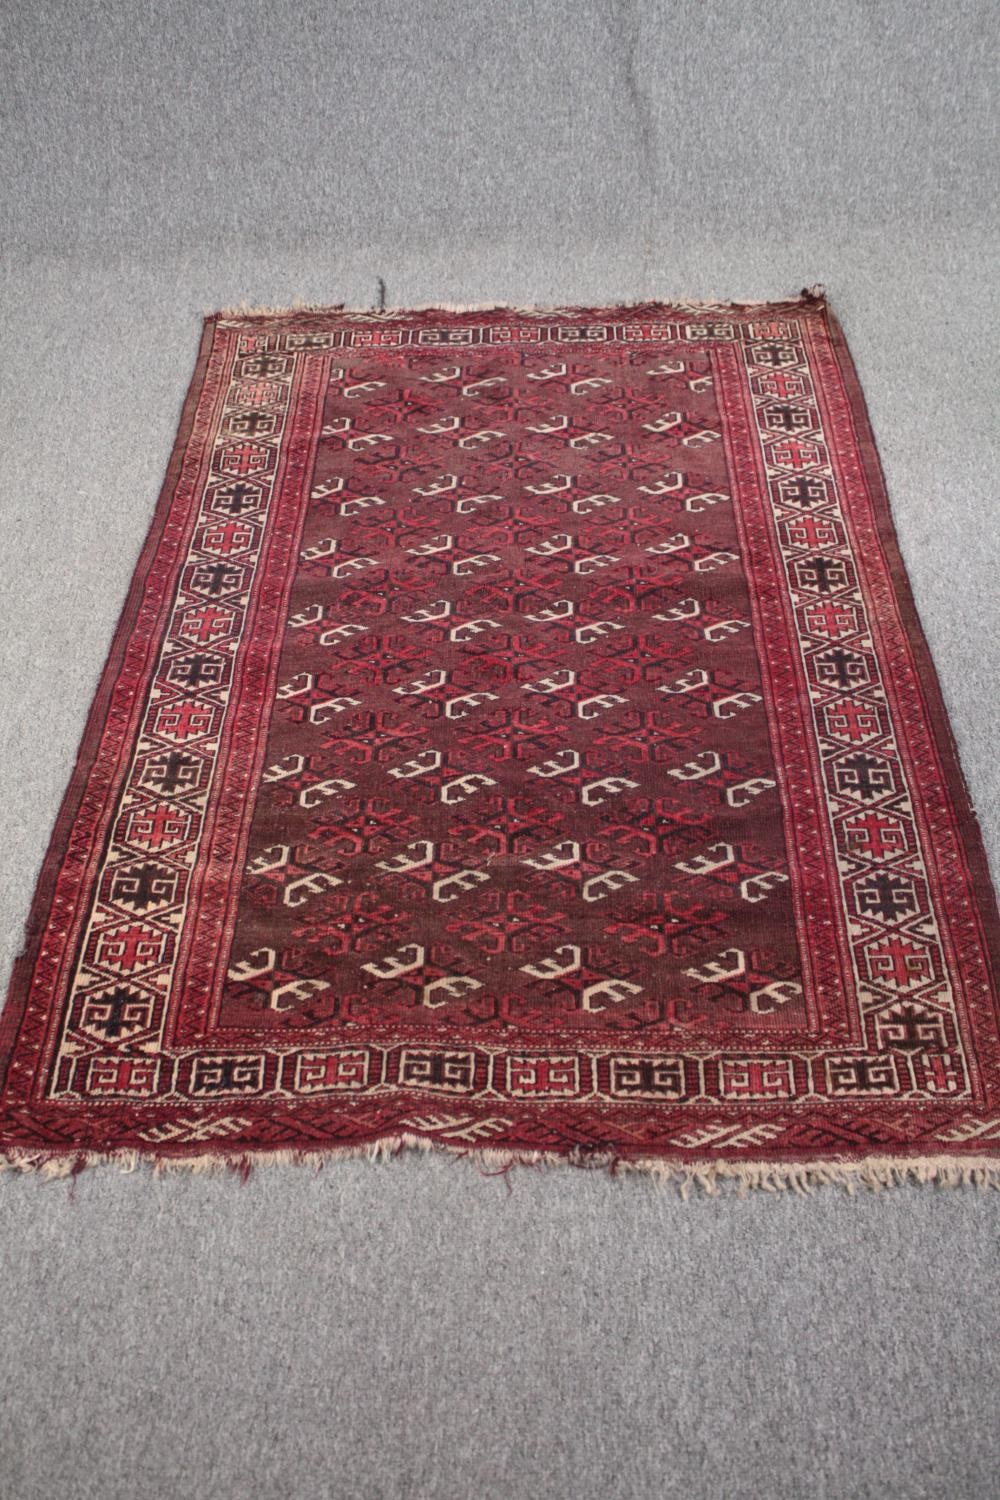 Rug, Belouch with repeating stylised motifs on a burgundy ground within multiple borders. L.167 W.